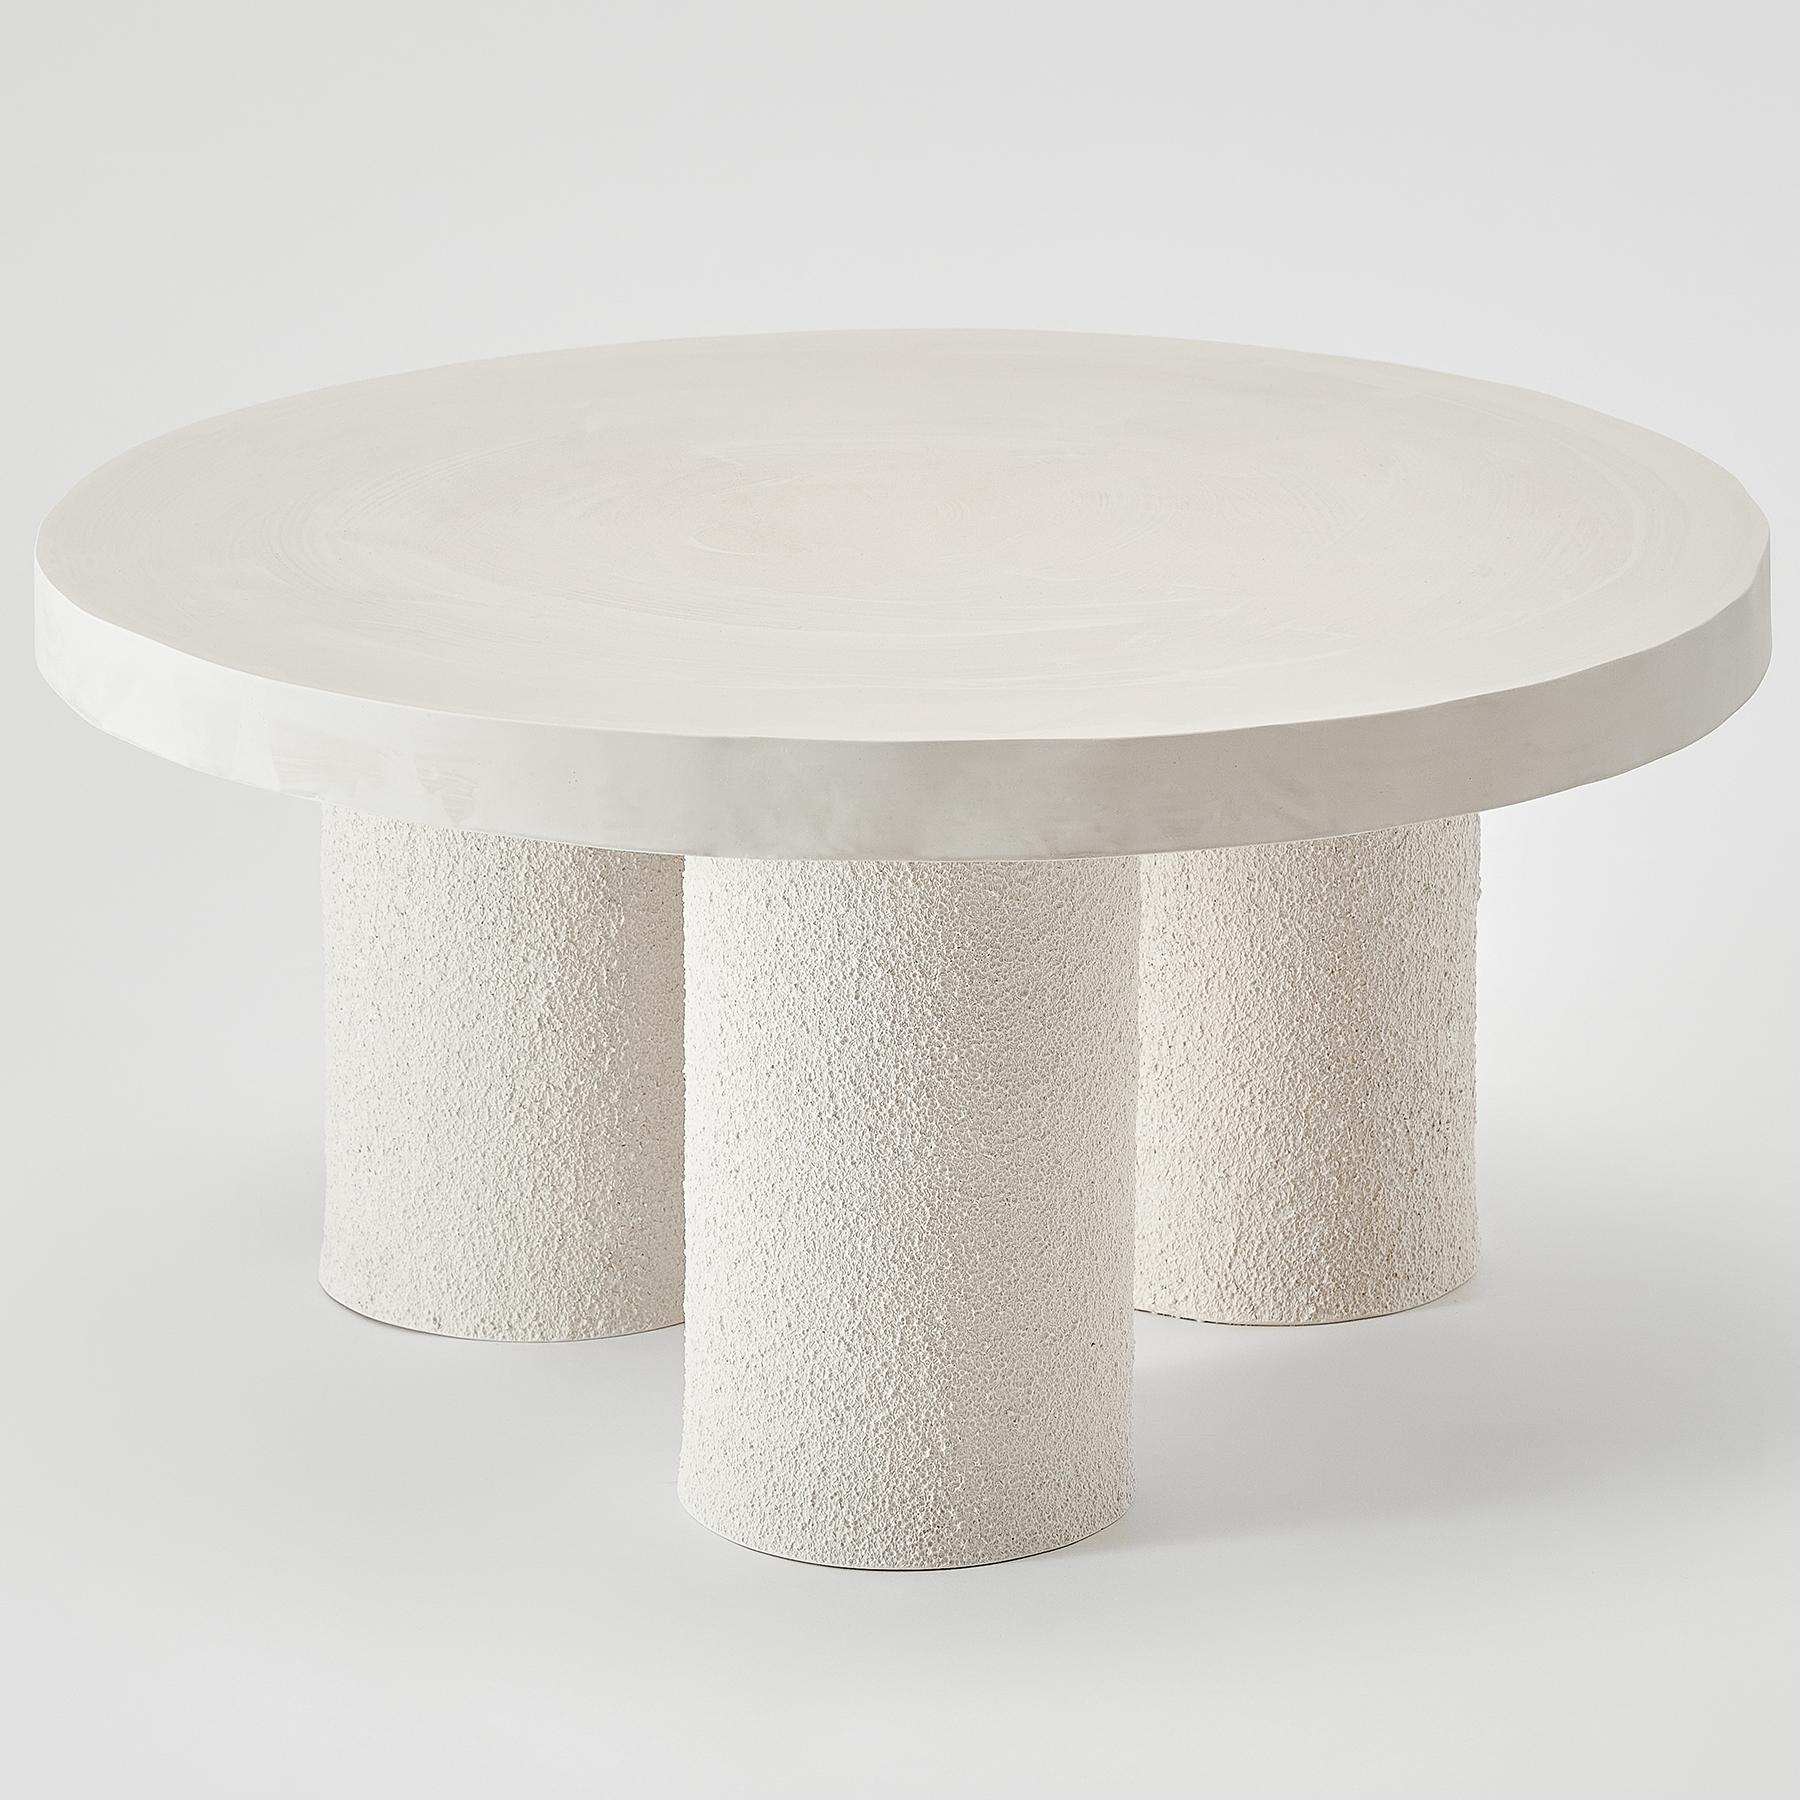 Creamy Cake Coffee Table by Perler
Dimensions: Ø 100 x H 40 cm.
Materials: Jesmonite.
Weight: 35-40 kg.

Available in two diameters: Ø 80 and 100 cm; and two different heights: 35 and 40 cm.  Every piece from the Bake a Cake collection is